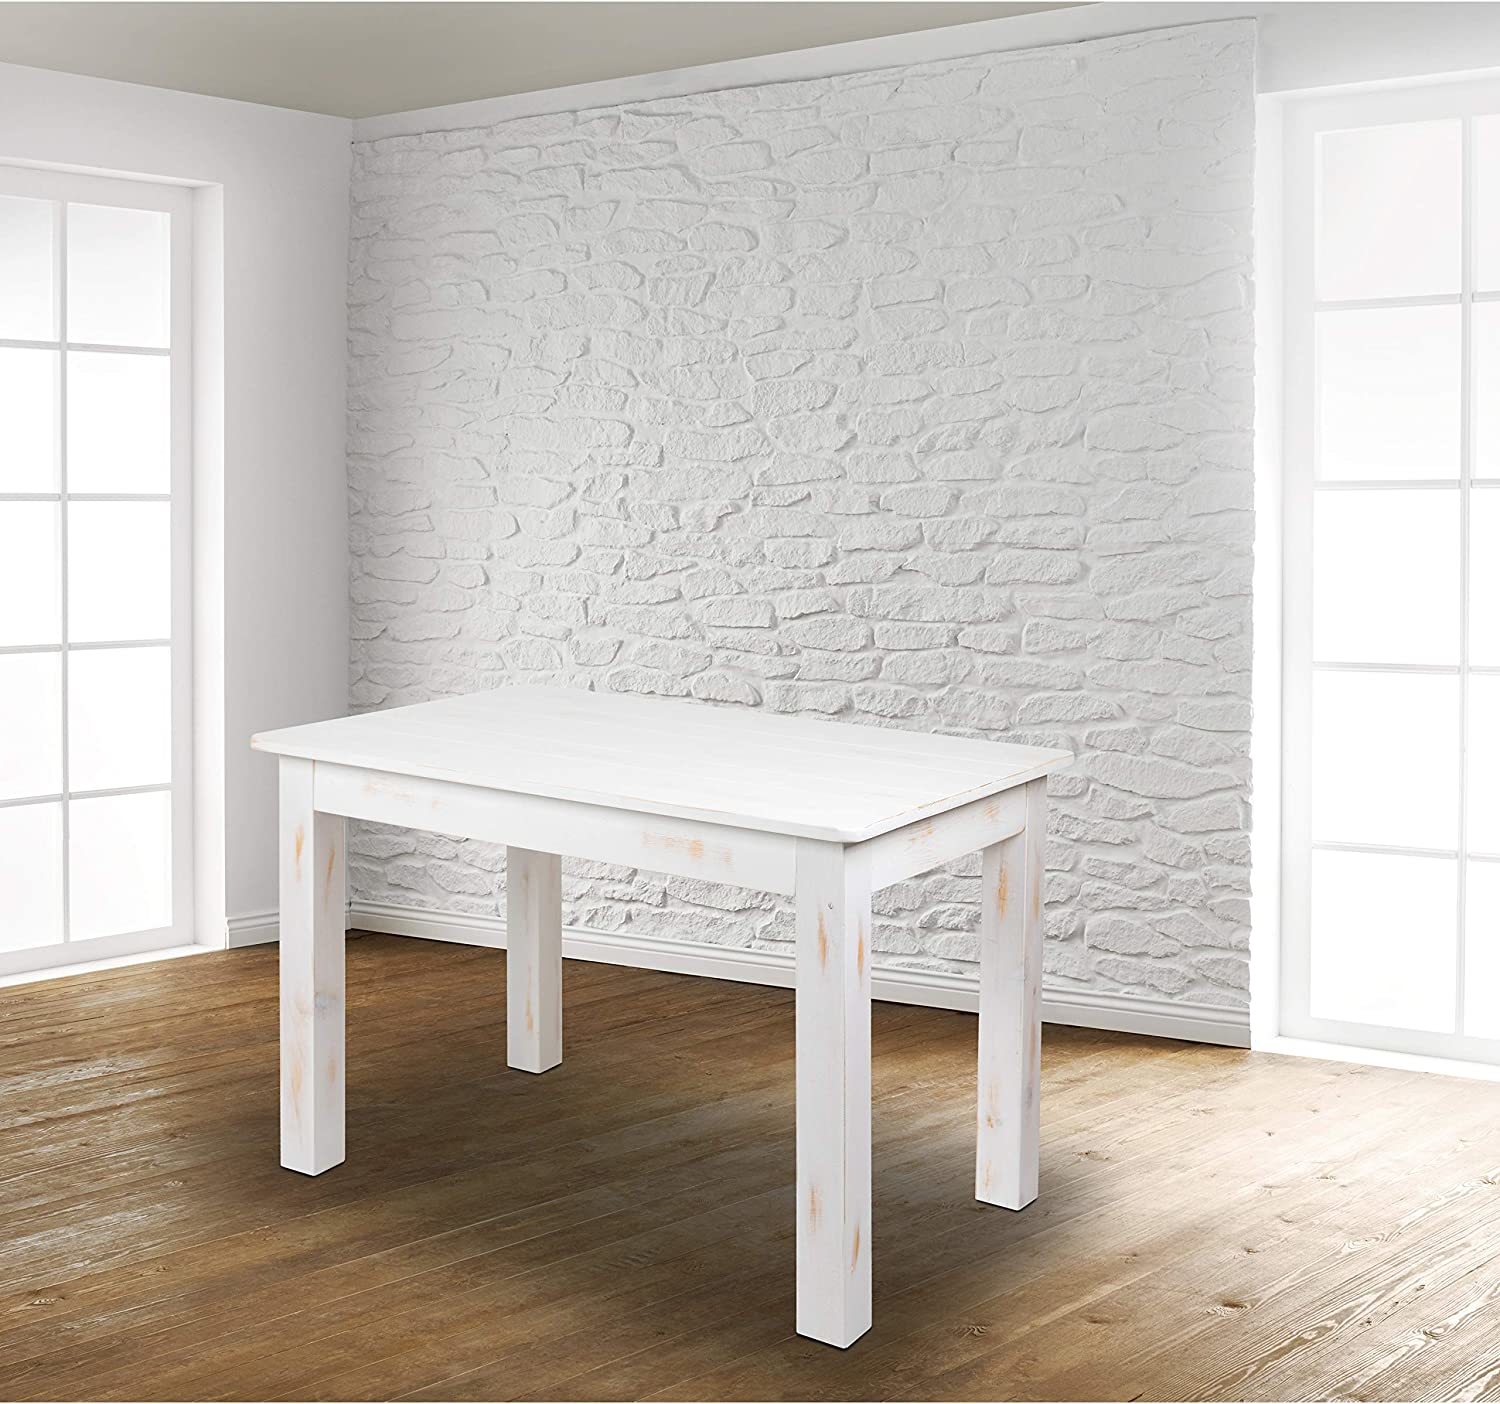 Primary image for Rectangular Antique Rustic White Solid Pine Farm Dining Table, 46" X 30", Flash